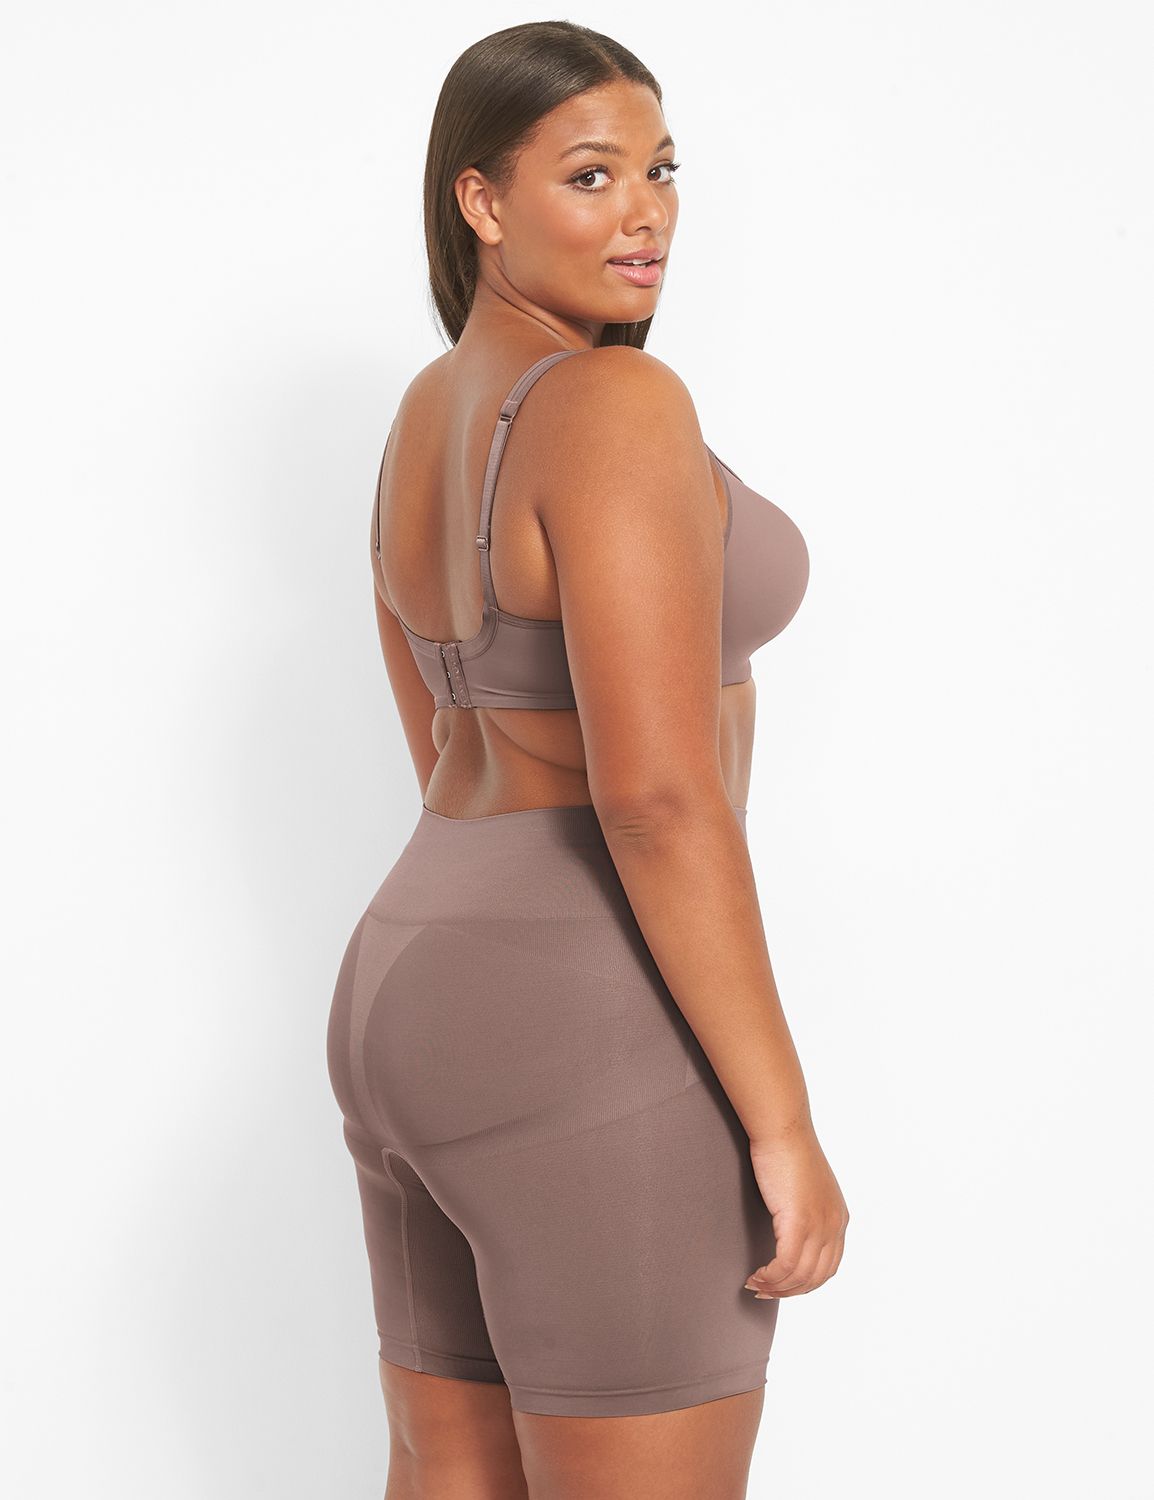 Up To 80% Off on BOOTY BRA INVISIBLE LIFT BUTT